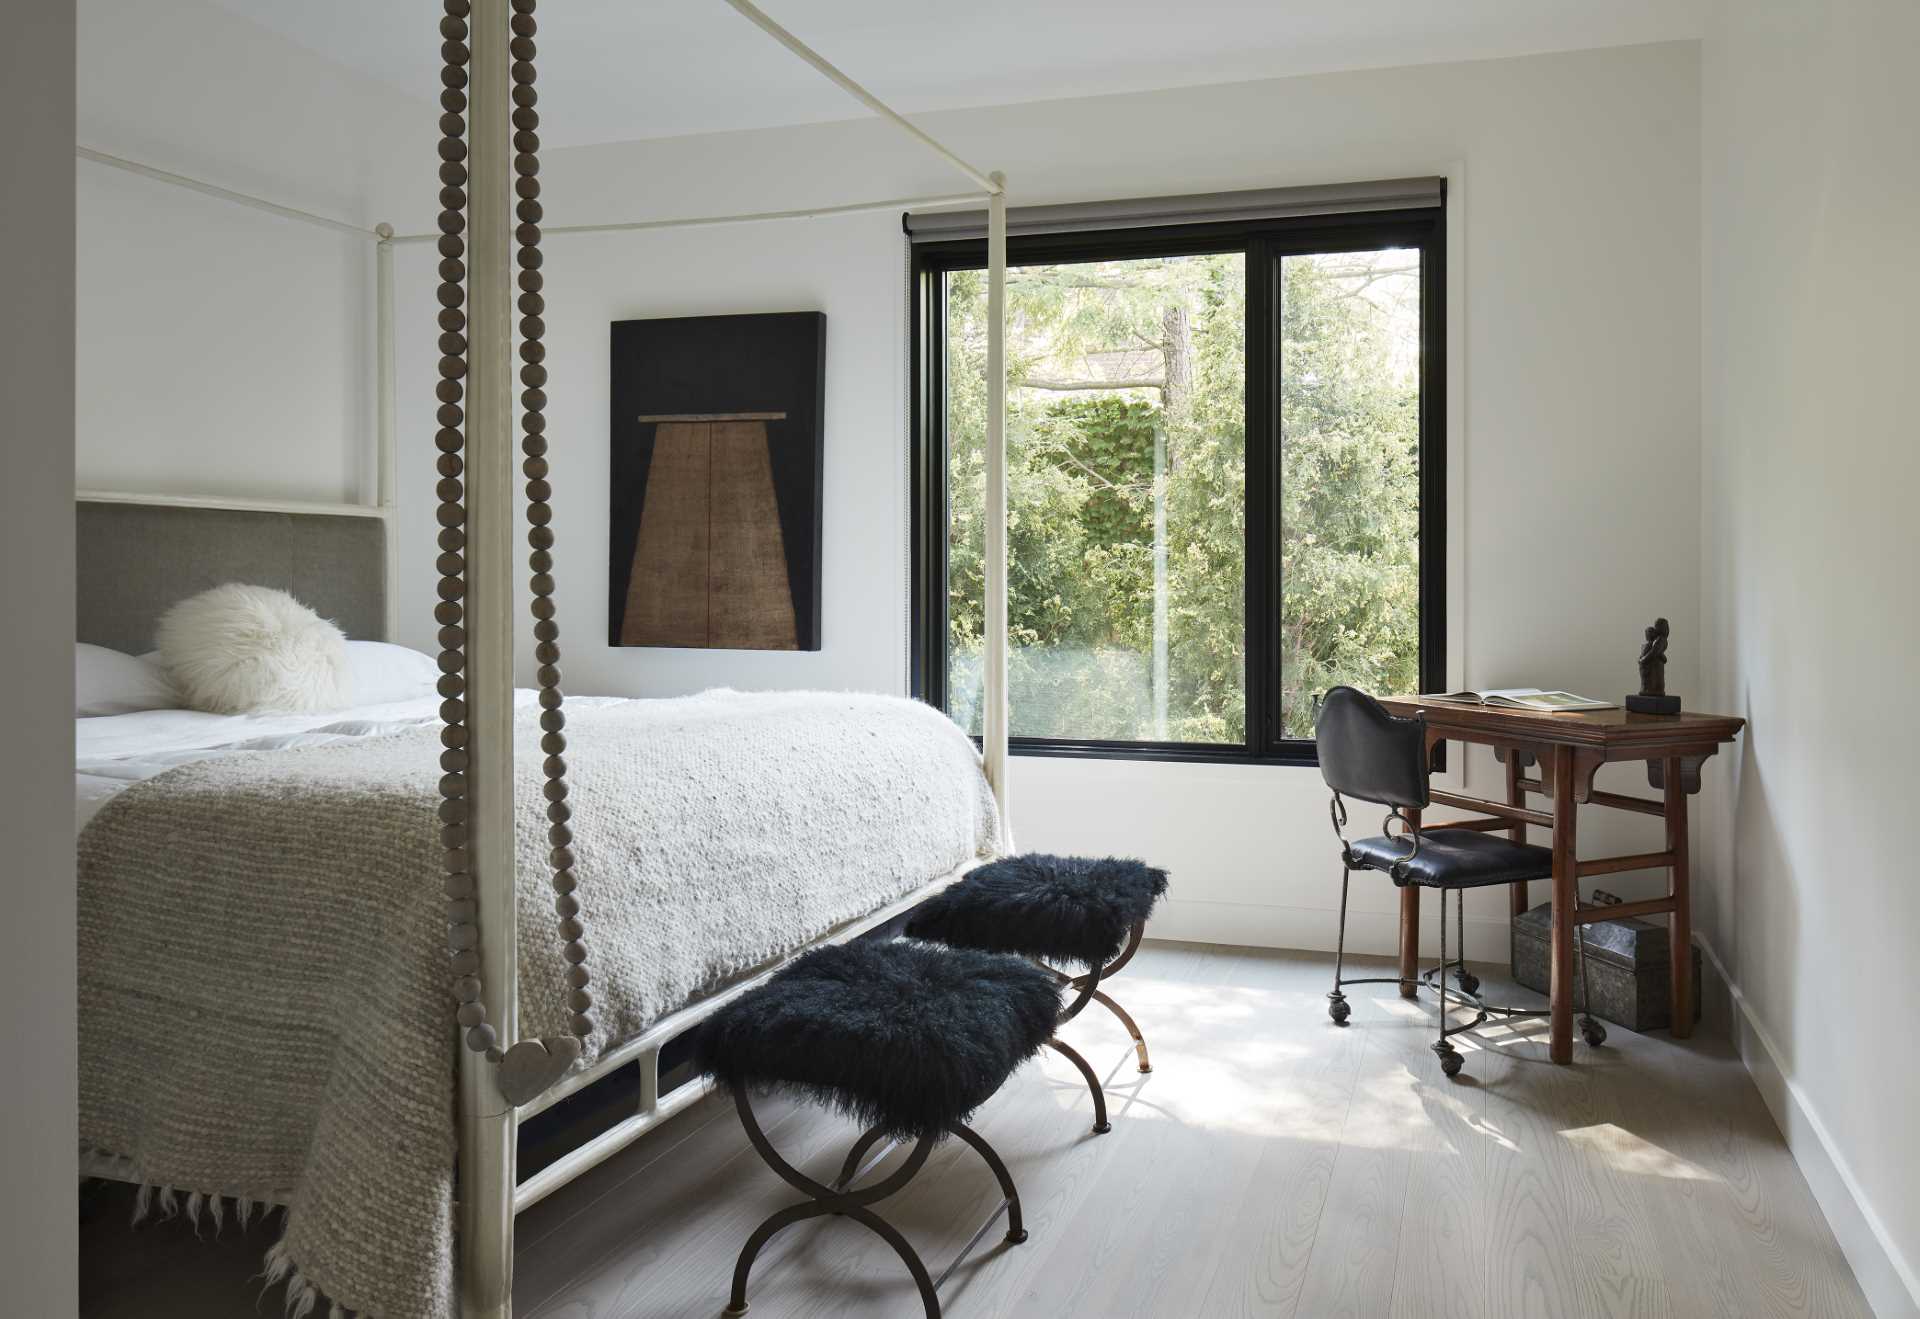 A contemporary bedroom a black window frame that complements the black furniture accents and art.